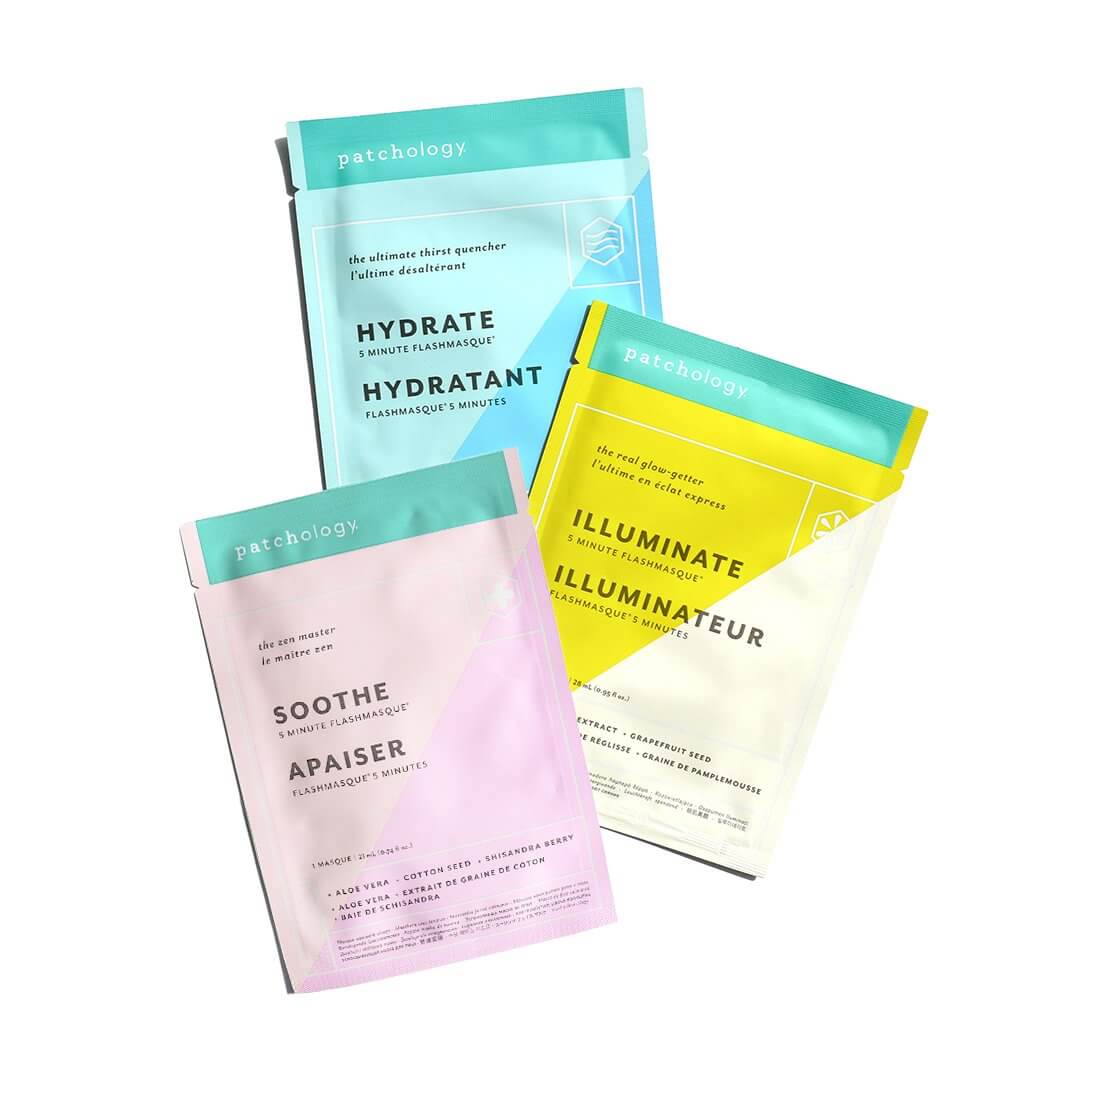 Patchology facial sheet masks hydrate soothe illuminate perfect weekend trio kit pack with white background